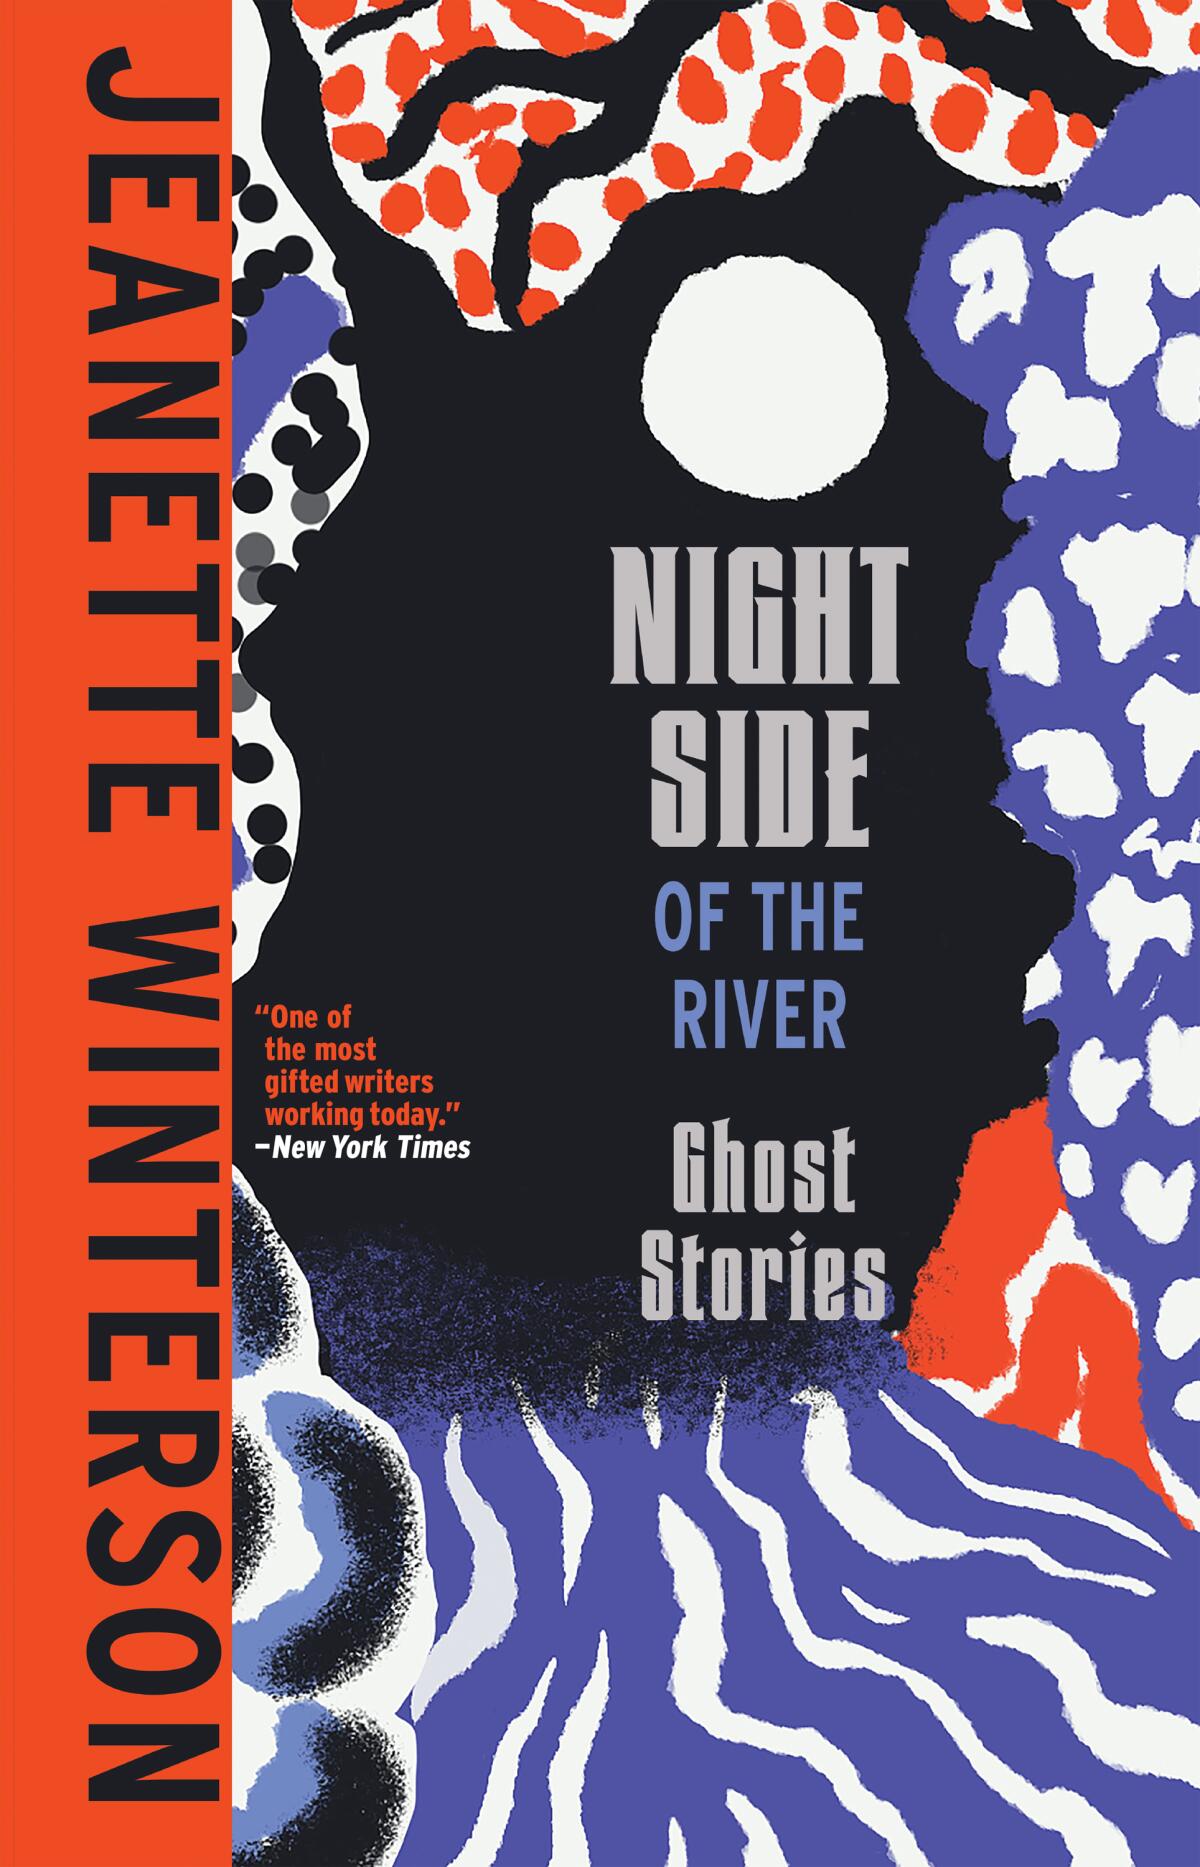 Book cover for "Night Side of the River" by Jeanette Winterson